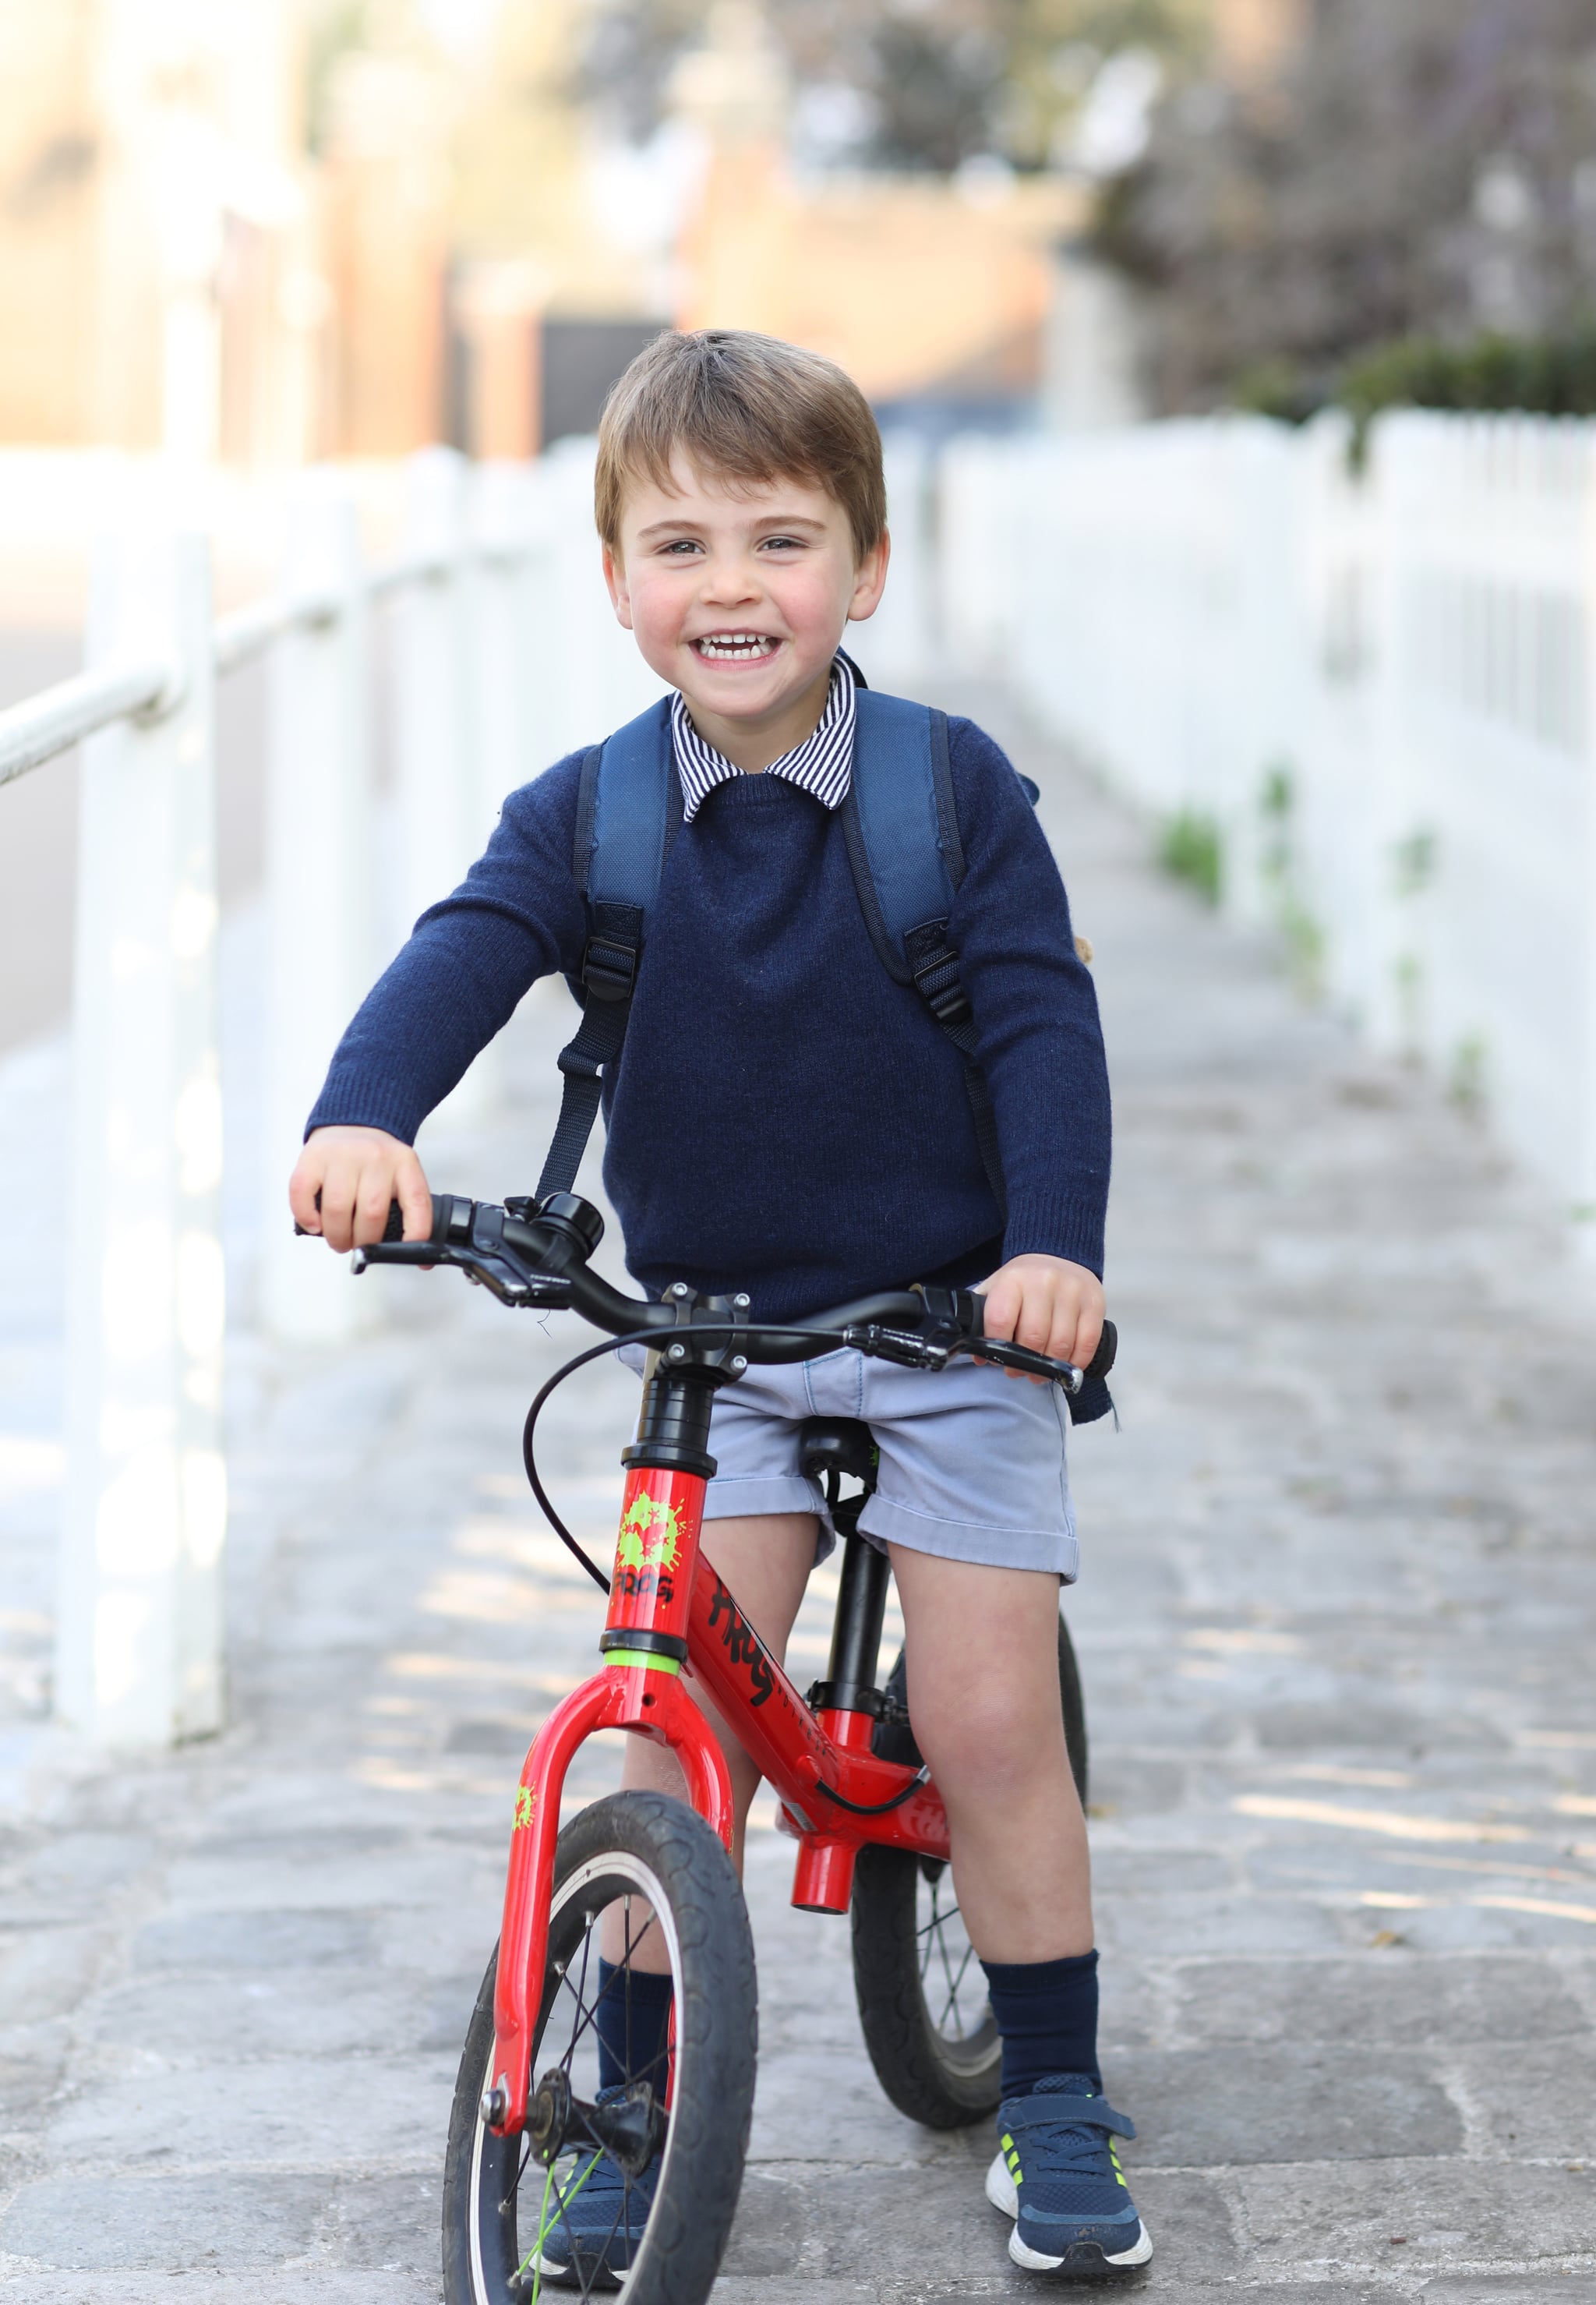 LONDON, UNITED KINGDOM - APRIL 21: ***This photograph must not be used after 31st December 2021 without prior permission from Kensington Palace. MANDATORY CREDIT: The Duchess of Cambridge.*** In this handout photo issued on April 22, 2021 by Kensington Palace and taken by Catherine, Duchess of Cambridge, Prince Louis rides his bicycle at home, prior to leaving for his first day of nursery at the Willcocks Nursery School, at Kensington Palace on April 21, 2021 in London, England. NEWS EDITORIAL USE ONLY. NO COMMERCIAL USE. NO MERCHANDISING, ADVERTISING, SOUVENIRS, MEMORABILIA or COLOURABLY SIMILAR. This photograph is provided to you strictly on condition that you will make no charge for the supply, release or publication of it and that these conditions and restrictions will apply (and that you will pass these on) to any organisation to whom you supply it. There shall be no commercial use whatsoever of the photographs (including by way of example only) any use in merchandising, advertising or any other non-news editorial use. The photographs must not be digitally enhanced, manipulated or modified in any manner or form and must include all of the individuals in the photograph when published. All other requests for use should be directed to the Press Office at Kensington Palace in writing. NOTE TO EDITORS: This handout photo may only be used in for editorial reporting purposes for the contemporaneous illustration of events, things or the people in the image or facts mentioned in the caption. Reuse of the picture may require further permission from the copyright holder. (Photo by The Duchess of Cambridge/Kensington Palace via Getty Images)